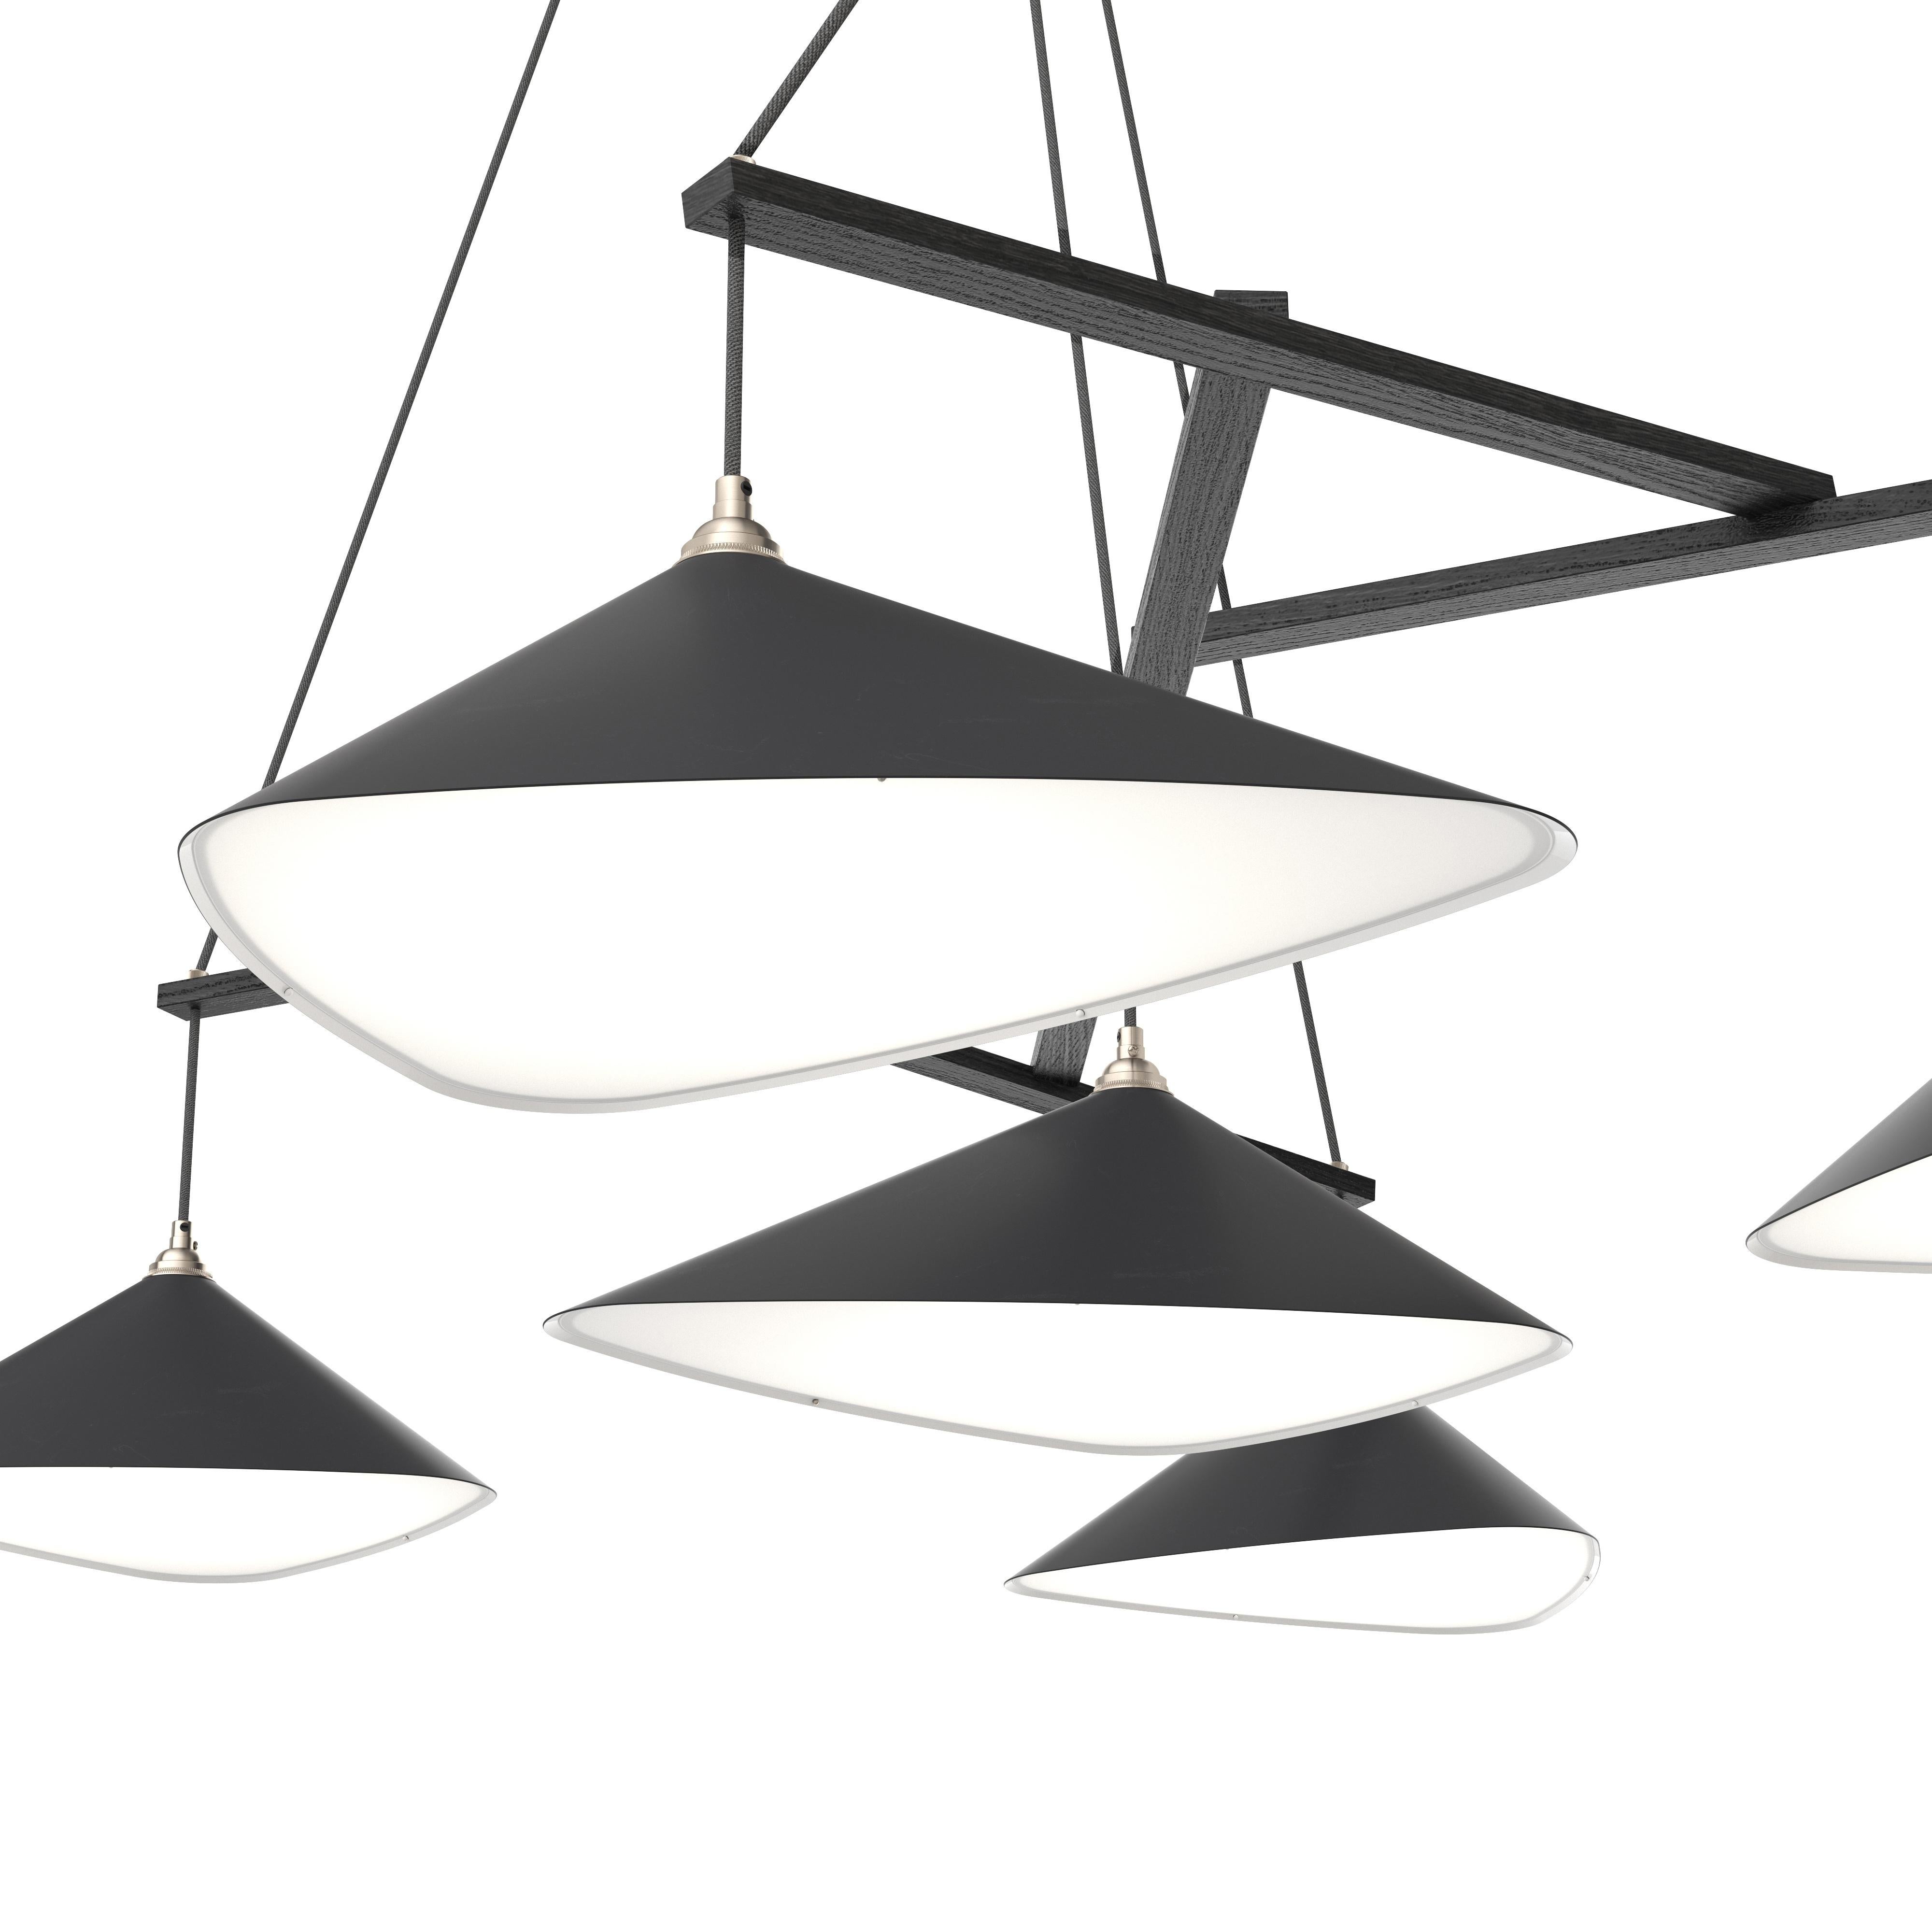 German Monumental Daniel Becker Emily 7 Chandelier in Anthracite/Black for Moss Objects For Sale